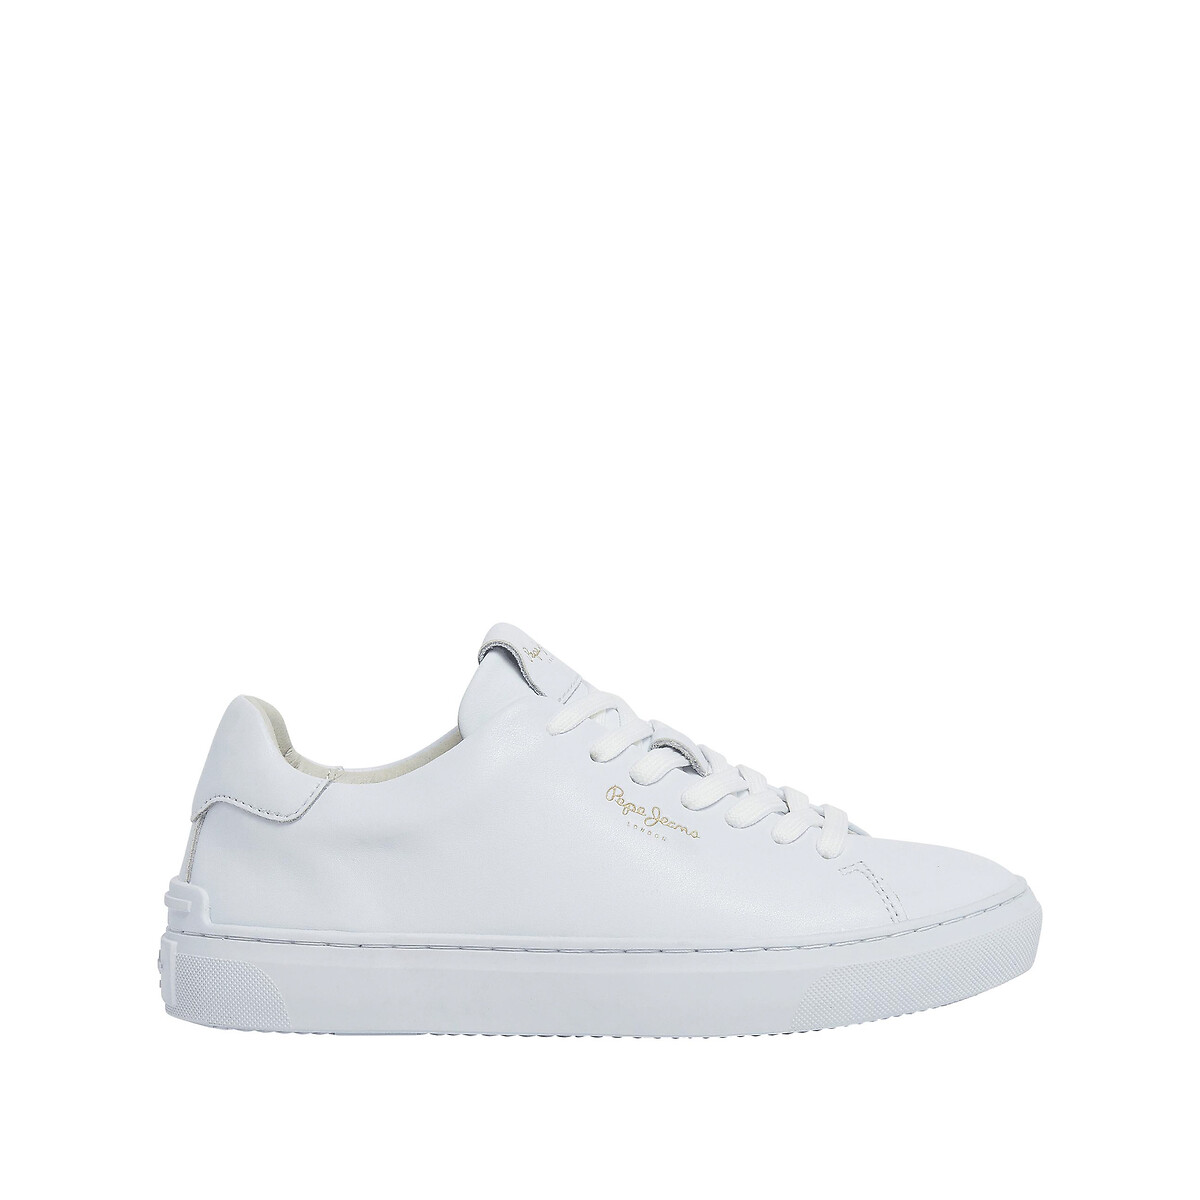 camden classic low top trainers in leather